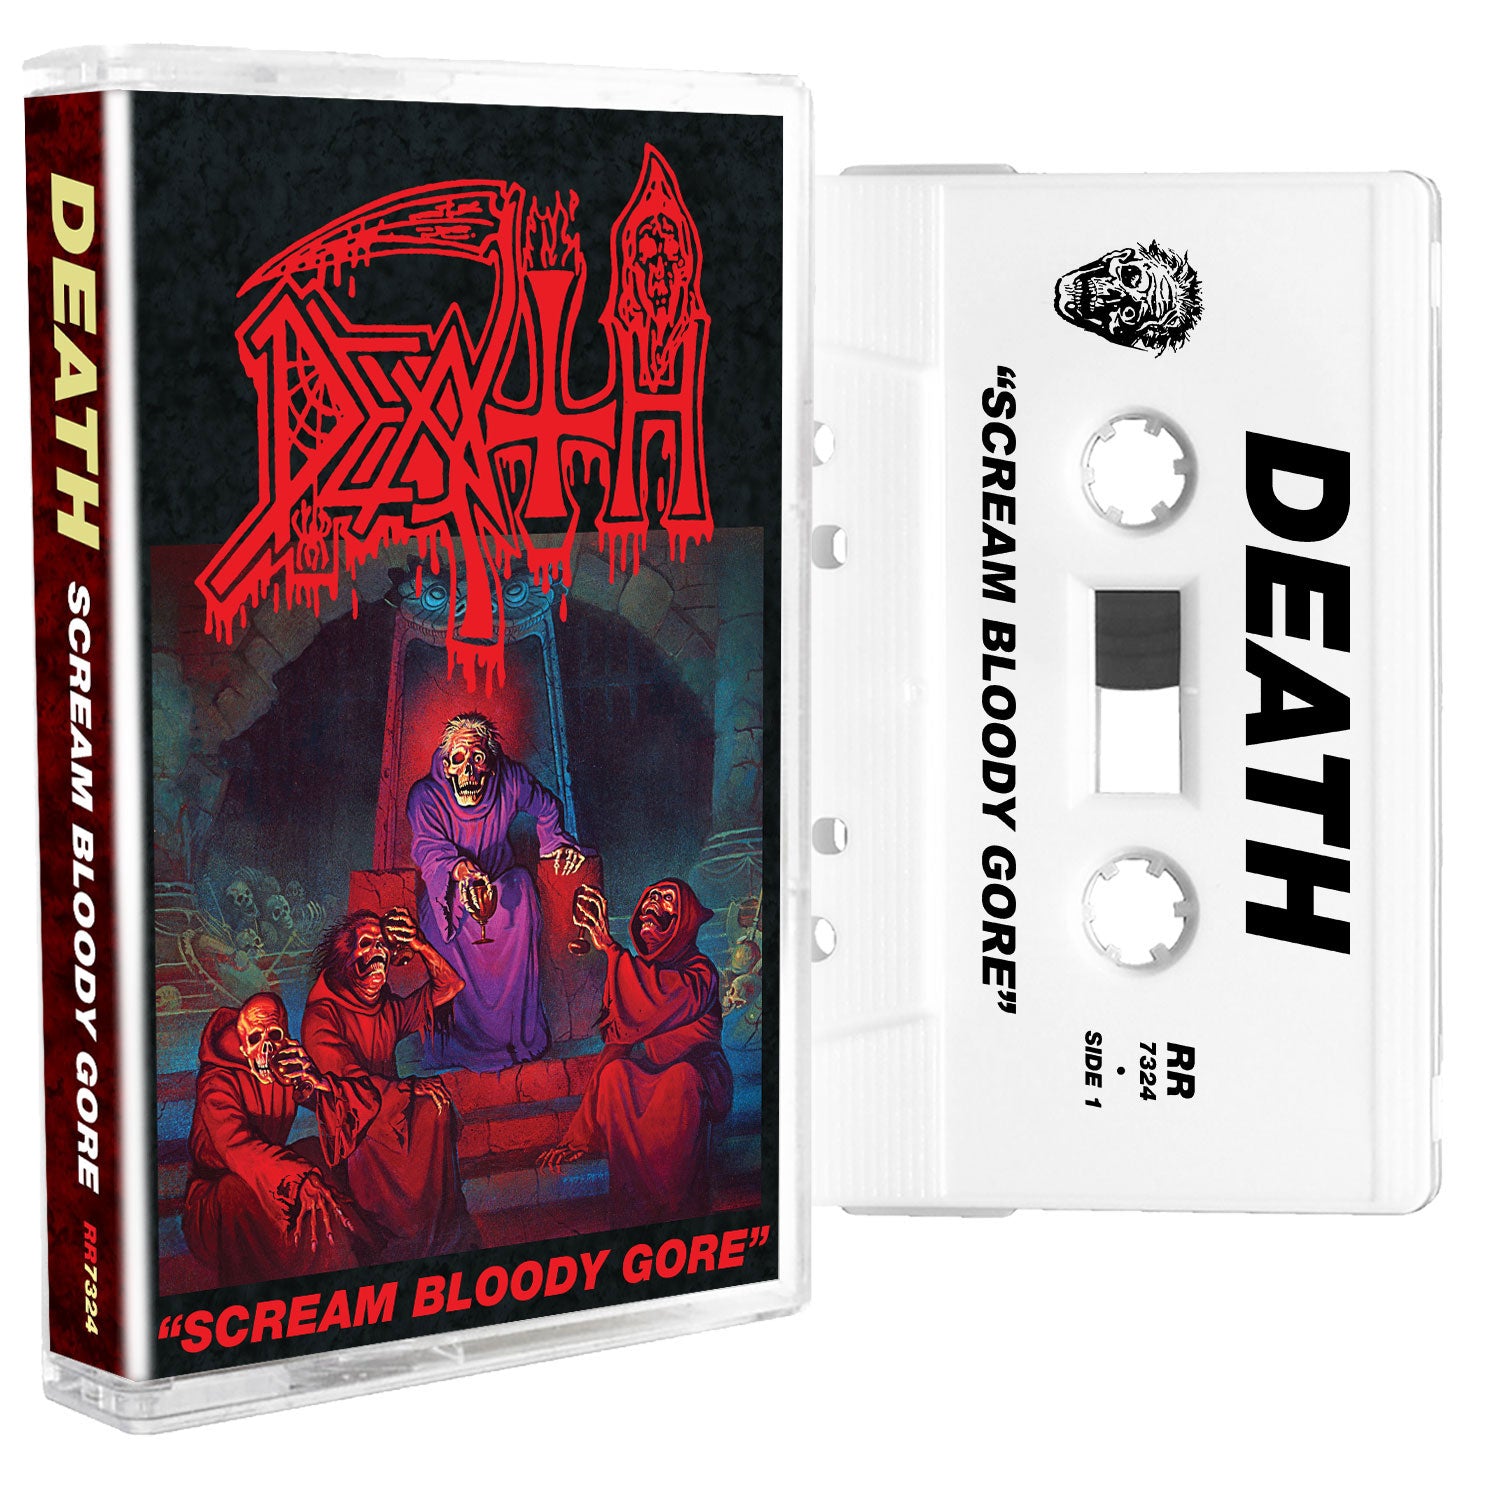 Death "Scream Bloody Gore" Limited Edition White Cassette Tape